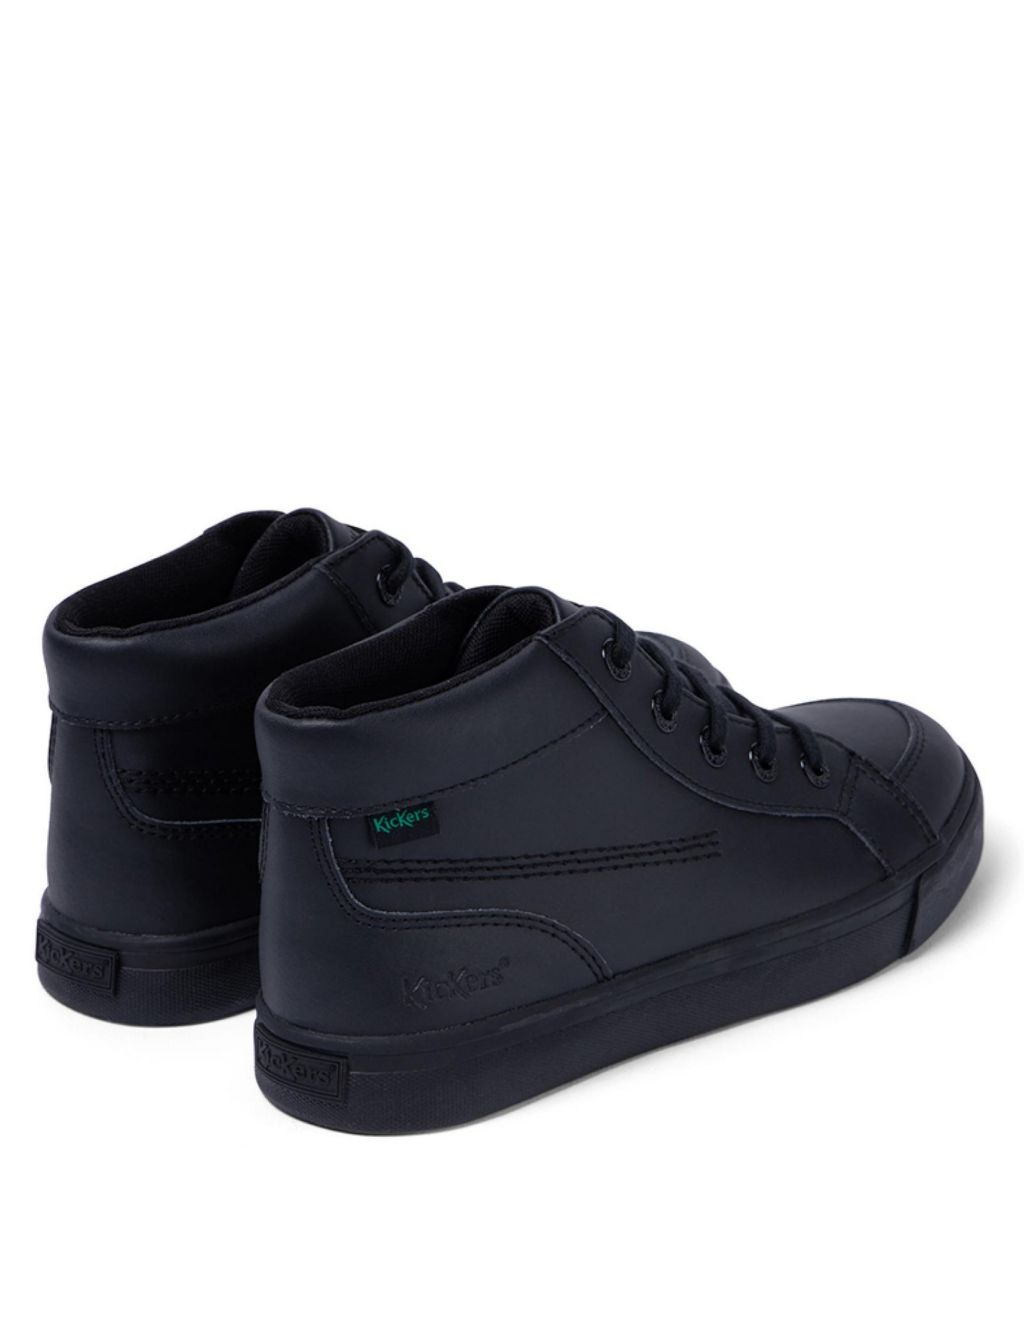 Kids' Leather High Top School Shoes image 3